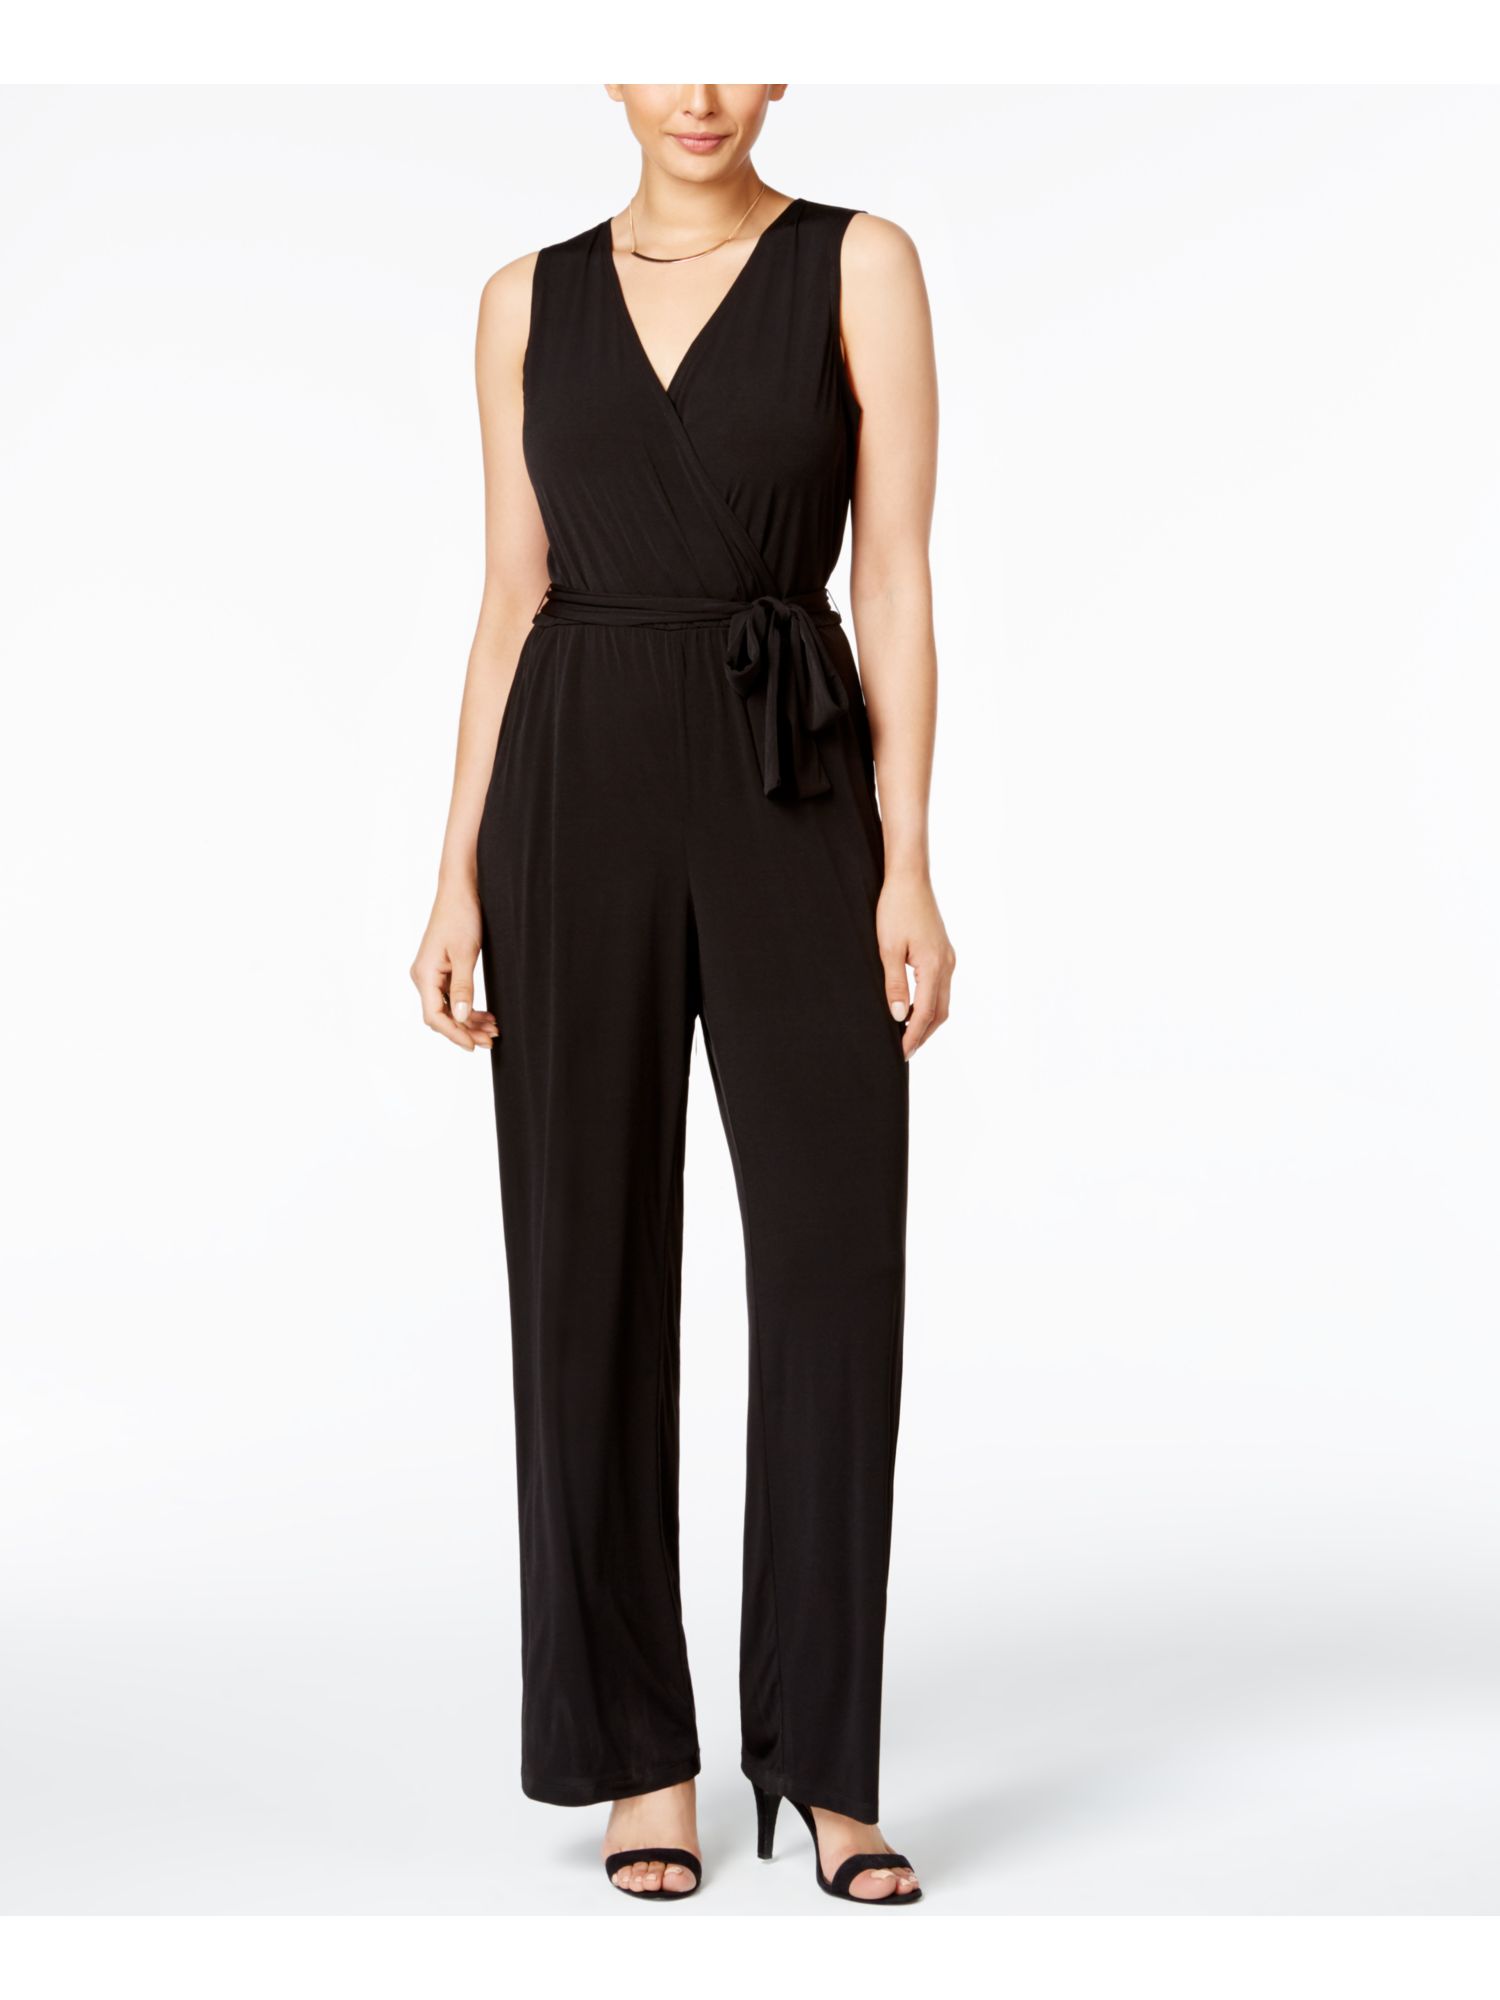 NY COLLECTION PETITE Womens Black Ruched Tie Evening Jumpsuit Petites PXS